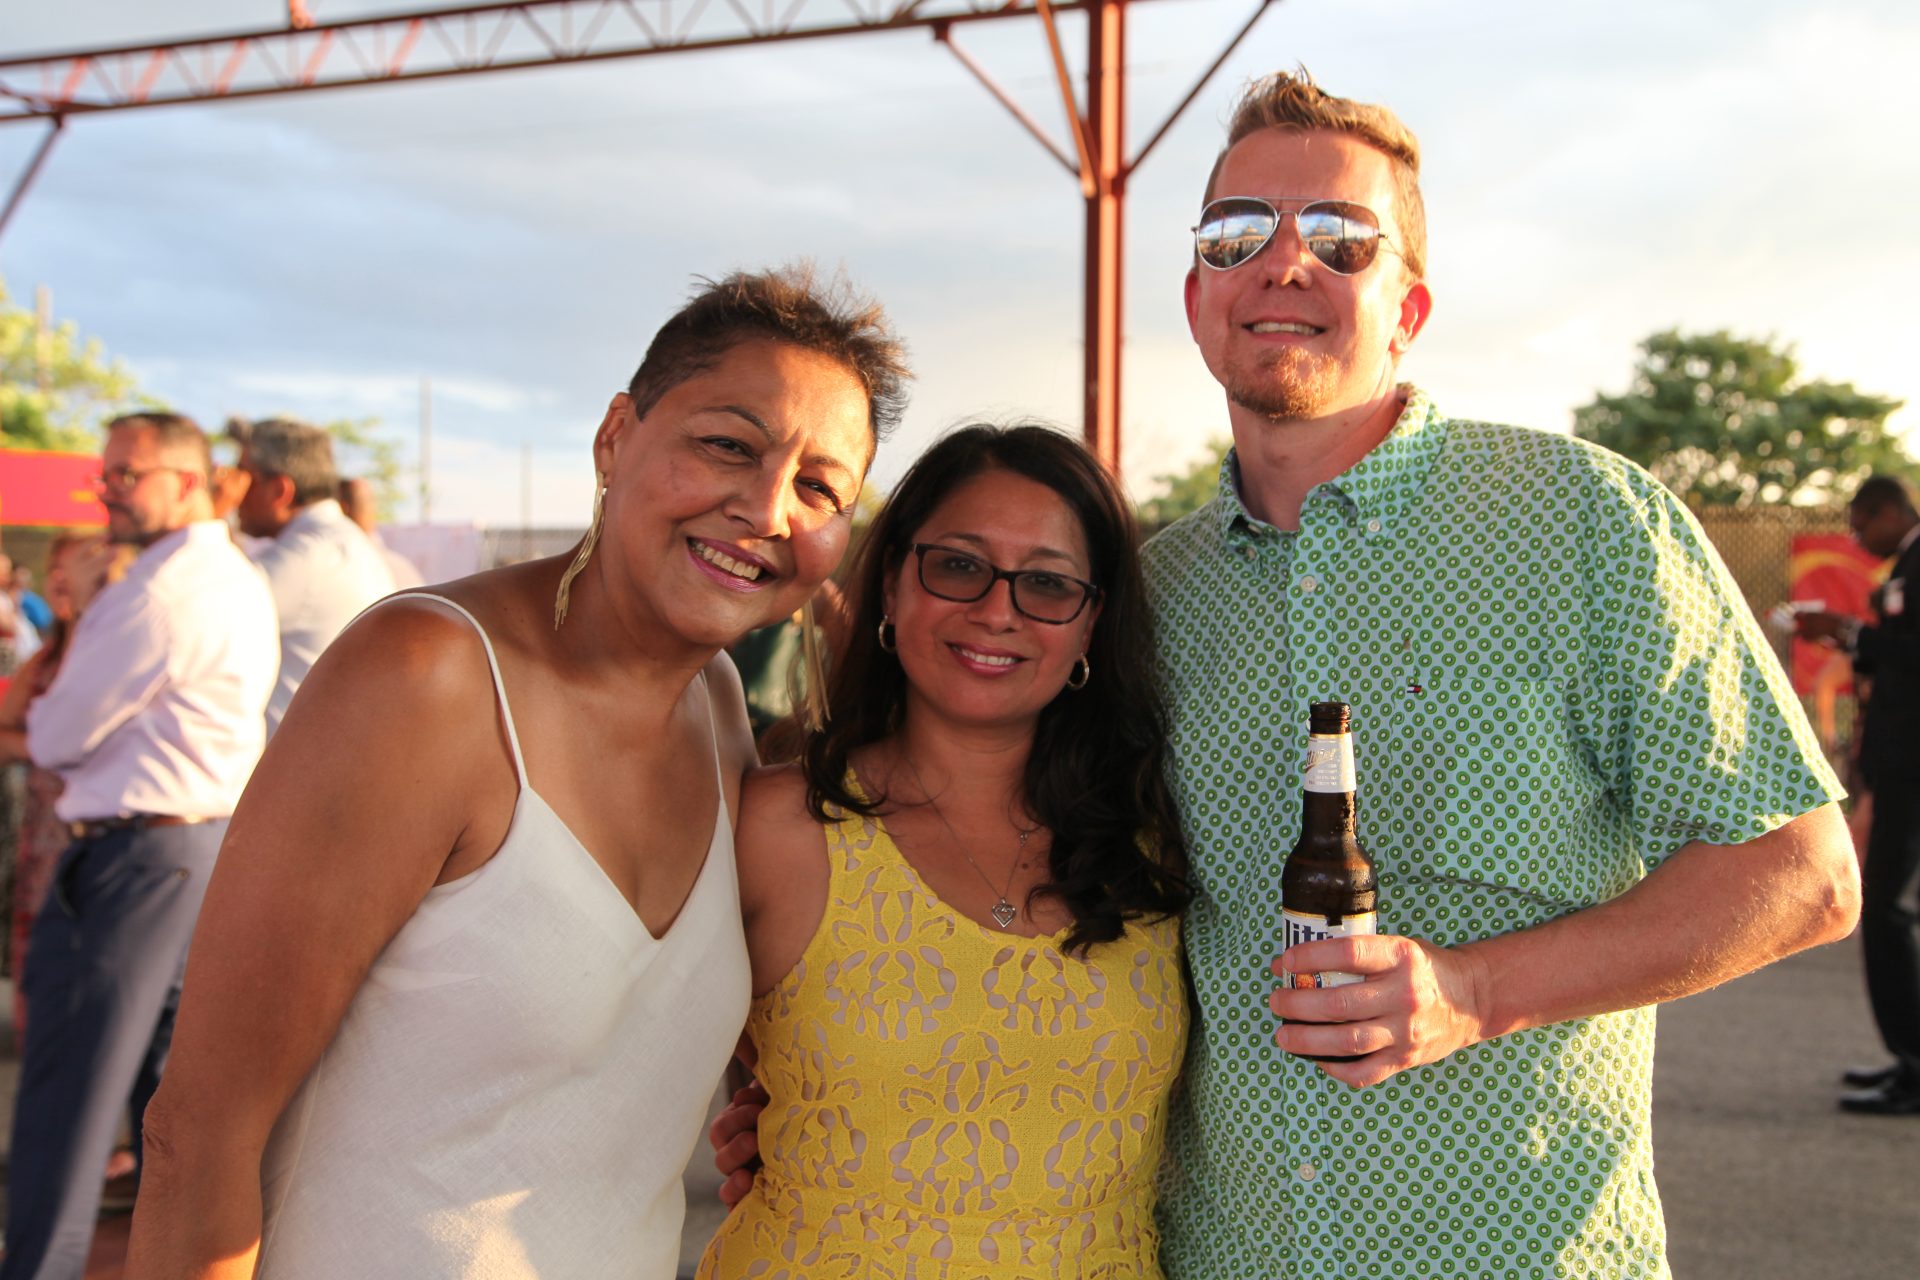 Two women pose with one man, who is holding a beer